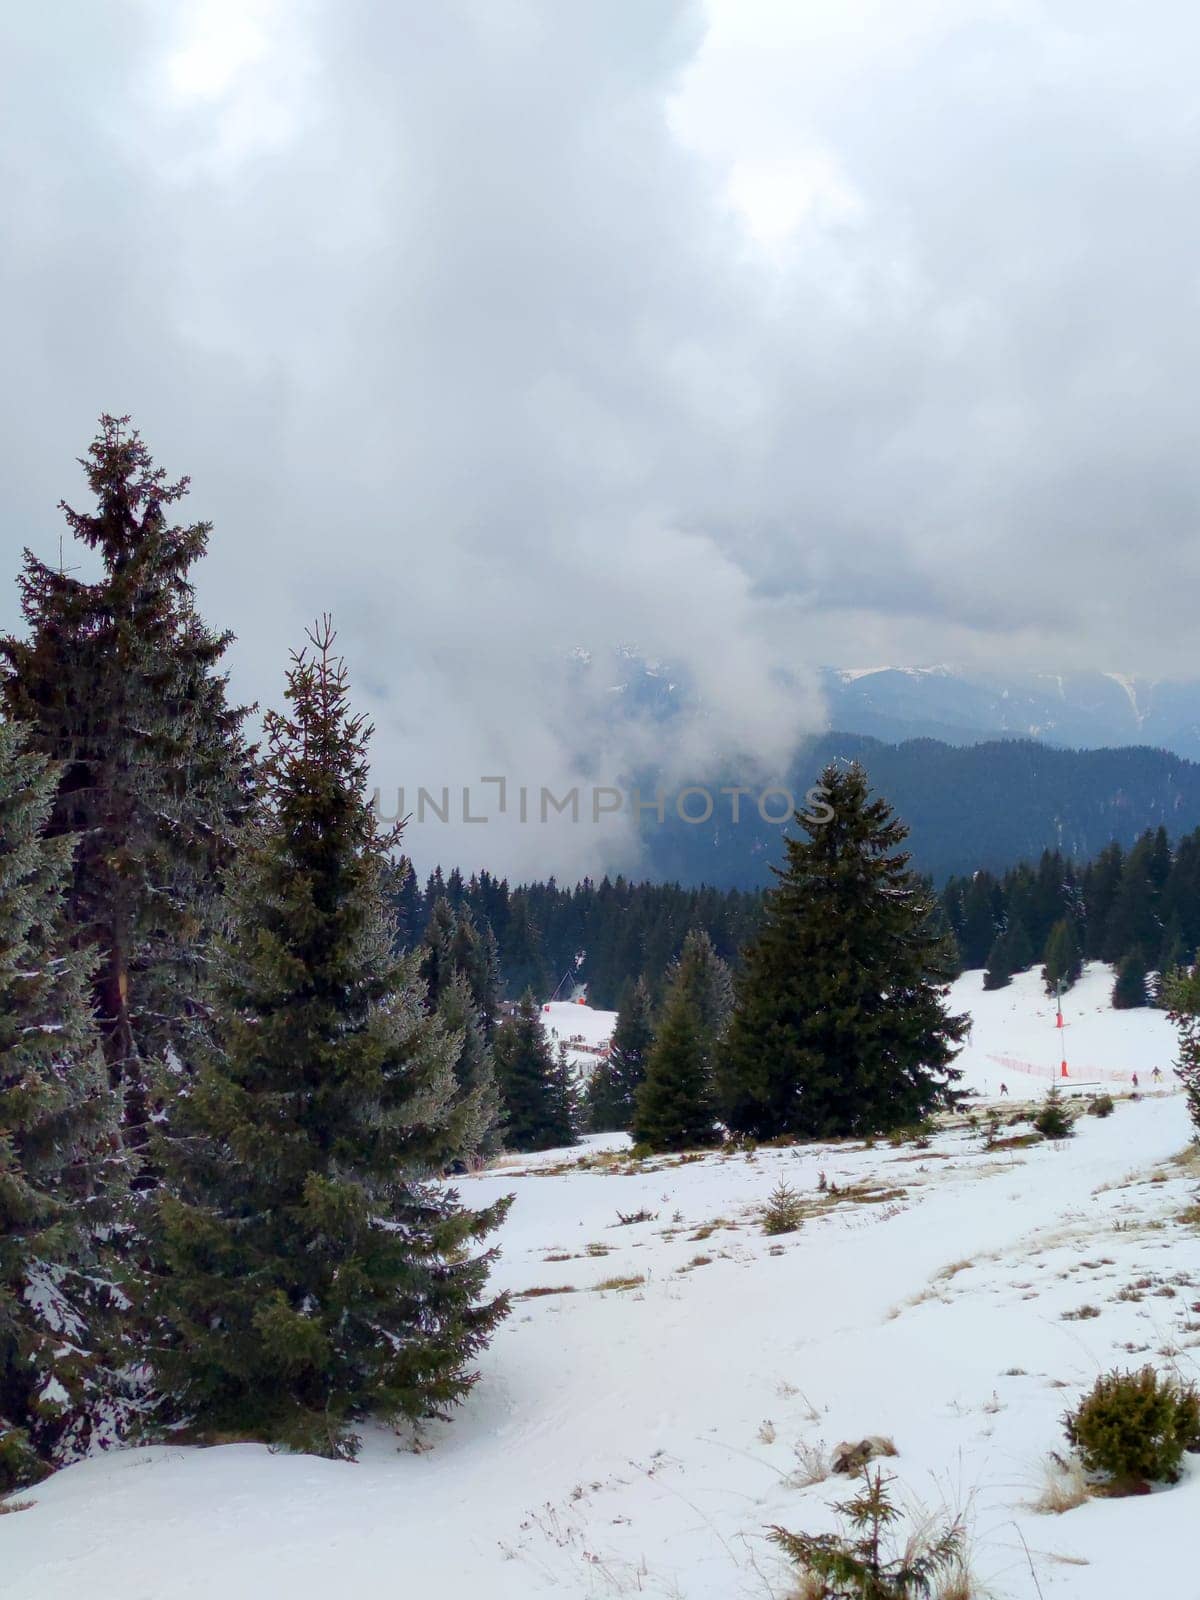 spruce trees against the backdrop of a winter foggy mountain landscape by Annado